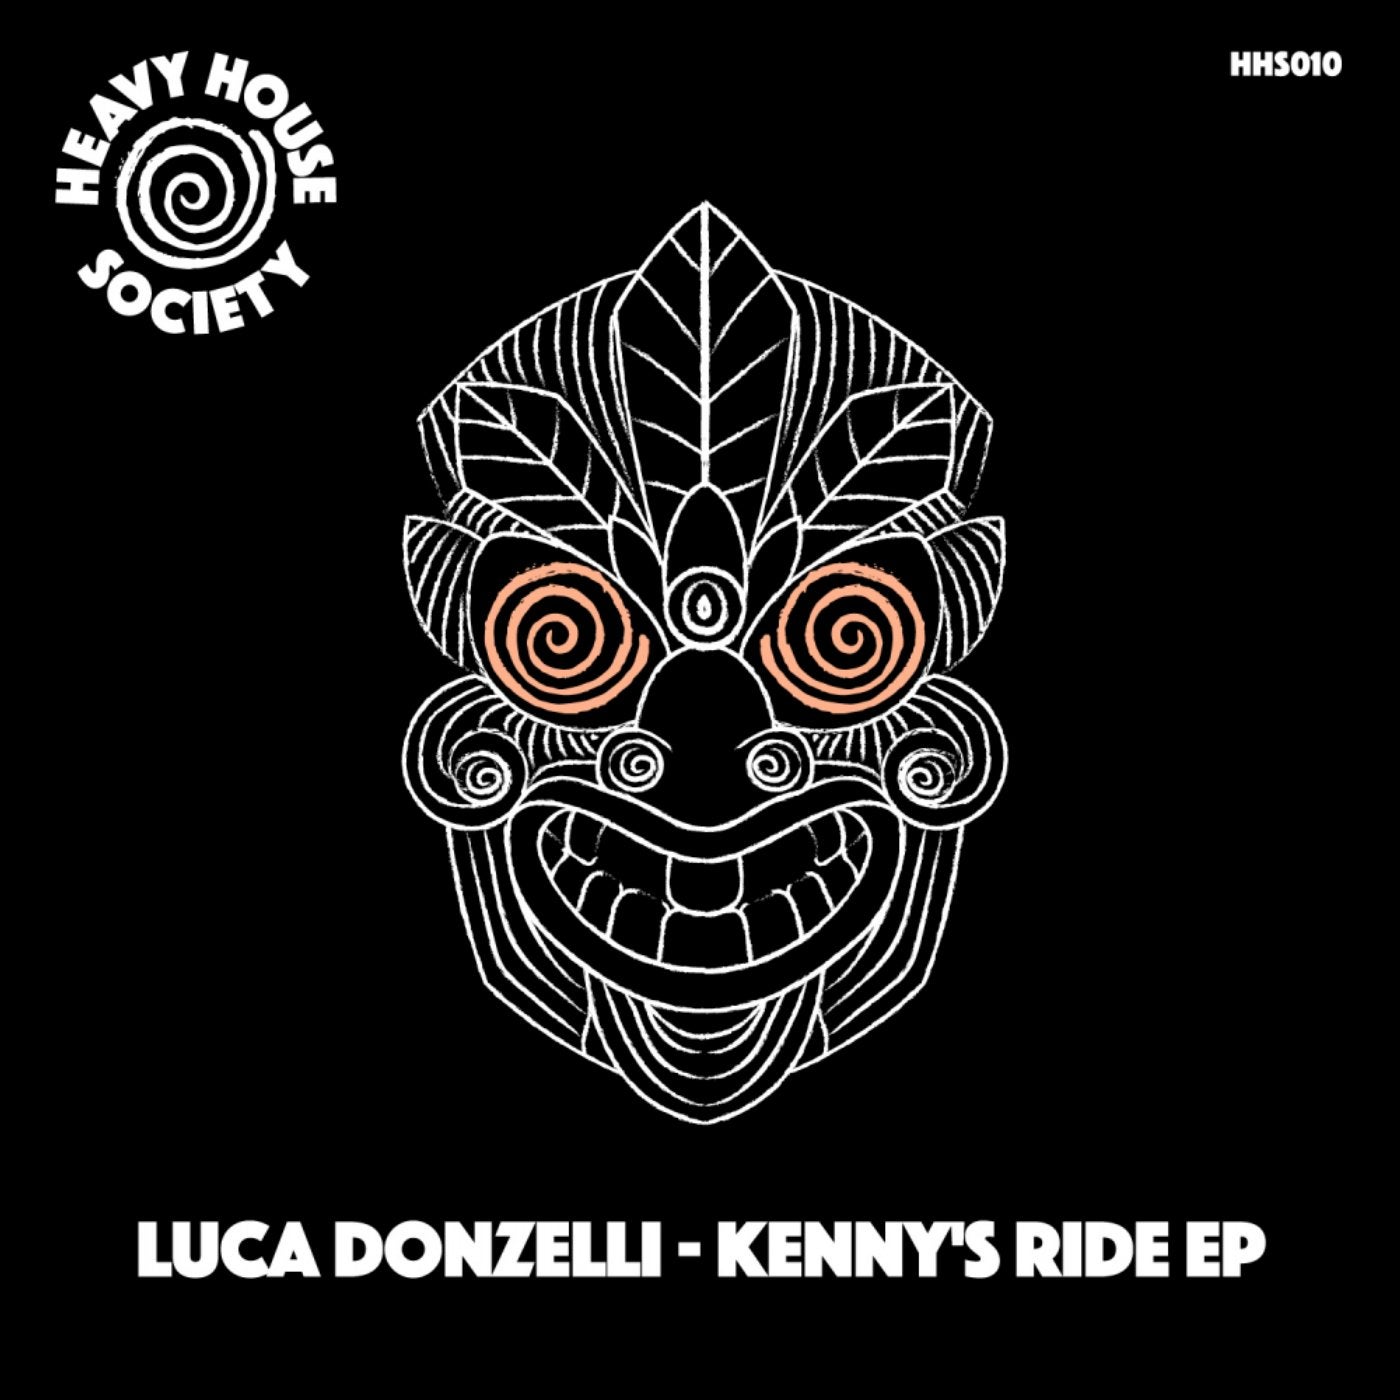 Kenny's Ride EP